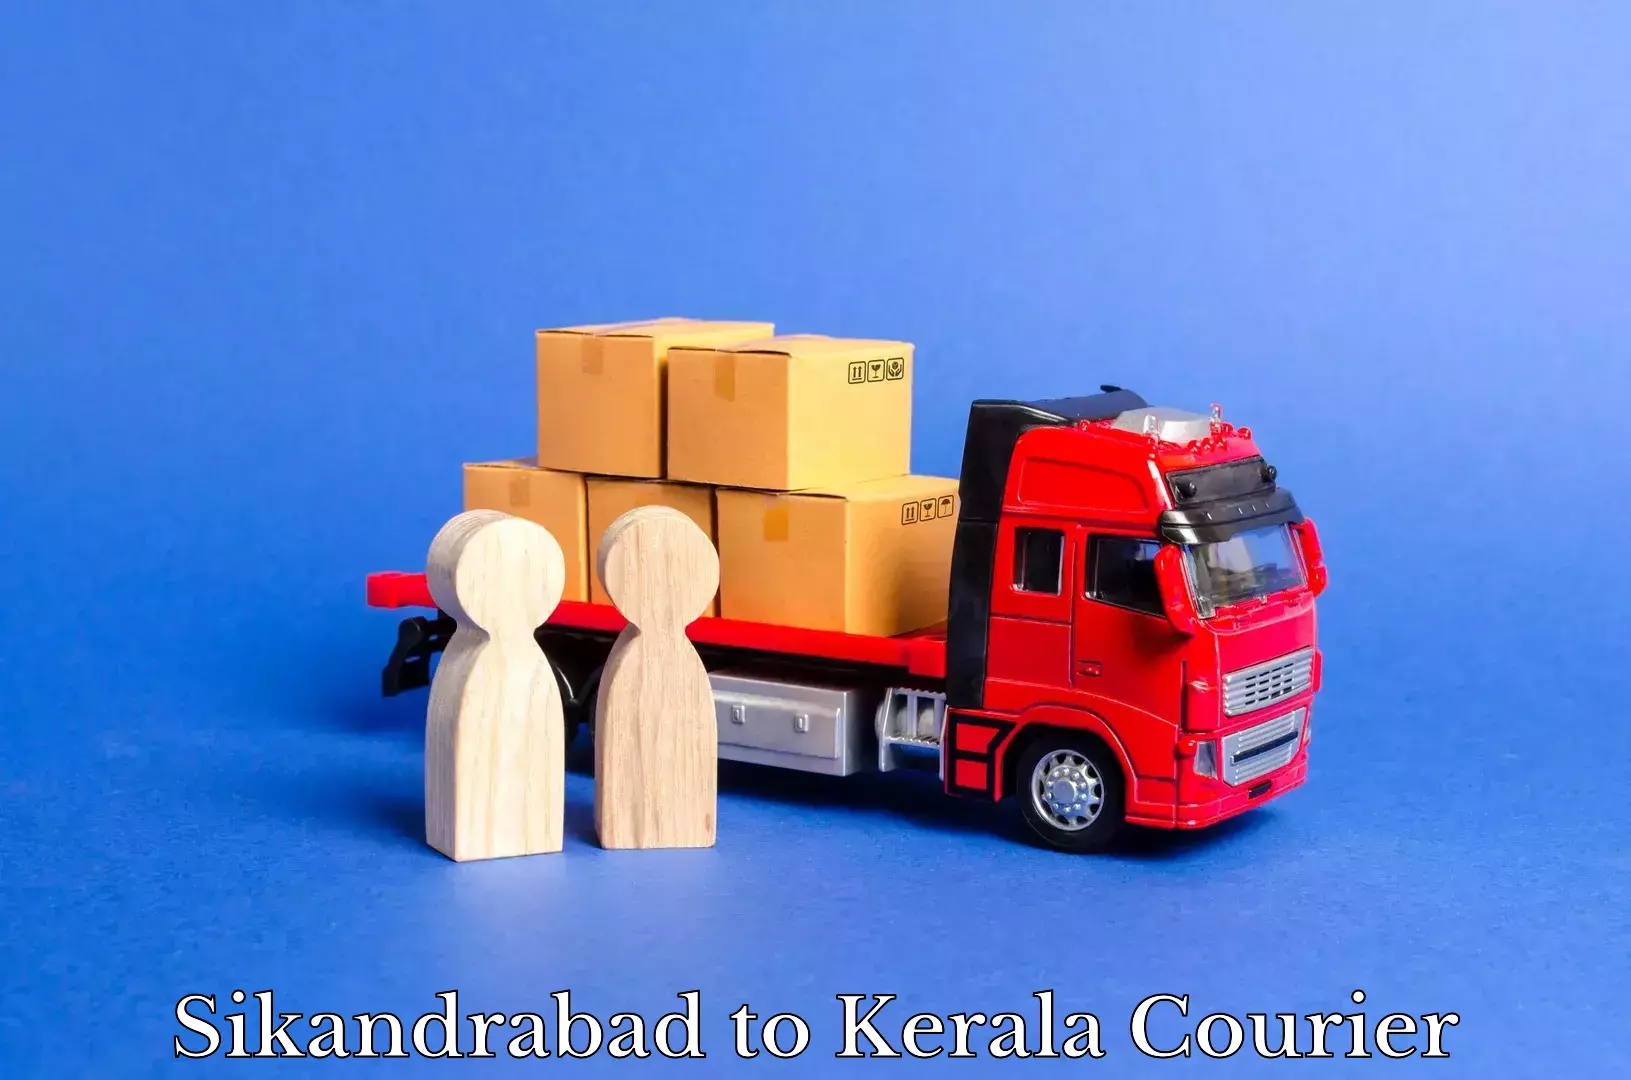 Sustainable courier practices Sikandrabad to Kerala